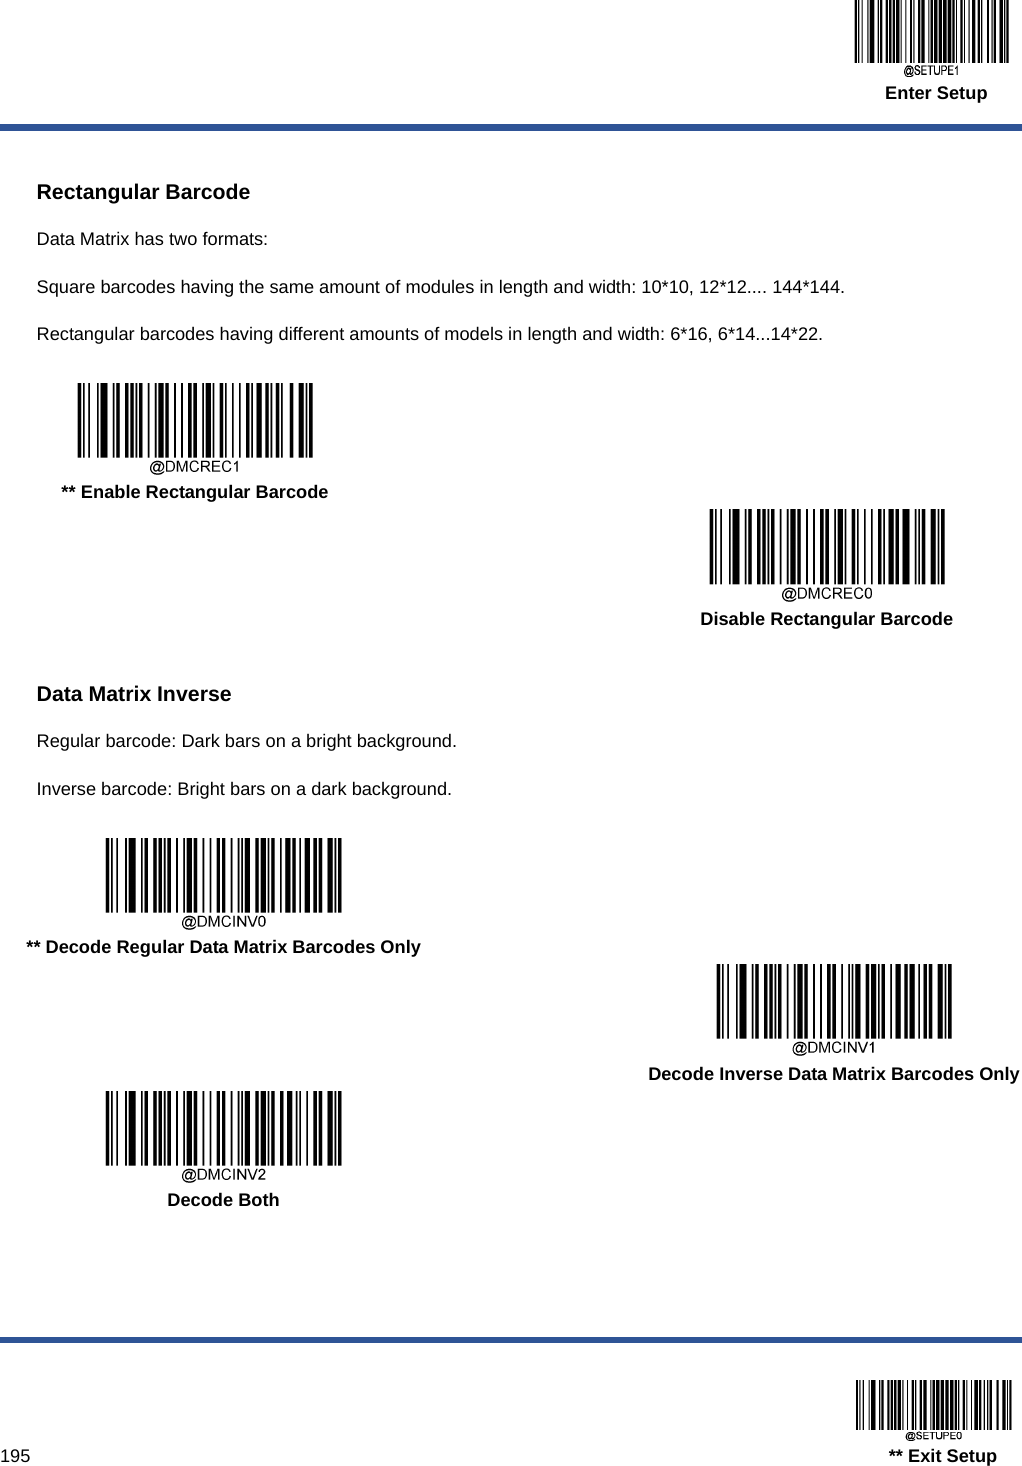  Enter Setup  195                                                                                   ** Exit Setup  Rectangular Barcode Data Matrix has two formats: Square barcodes having the same amount of modules in length and width: 10*10, 12*12.... 144*144. Rectangular barcodes having different amounts of models in length and width: 6*16, 6*14...14*22.     ** Enable Rectangular Barcode      Disable Rectangular Barcode  Data Matrix Inverse Regular barcode: Dark bars on a bright background. Inverse barcode: Bright bars on a dark background.     ** Decode Regular Data Matrix Barcodes Only      Decode Inverse Data Matrix Barcodes Only  Decode Both   